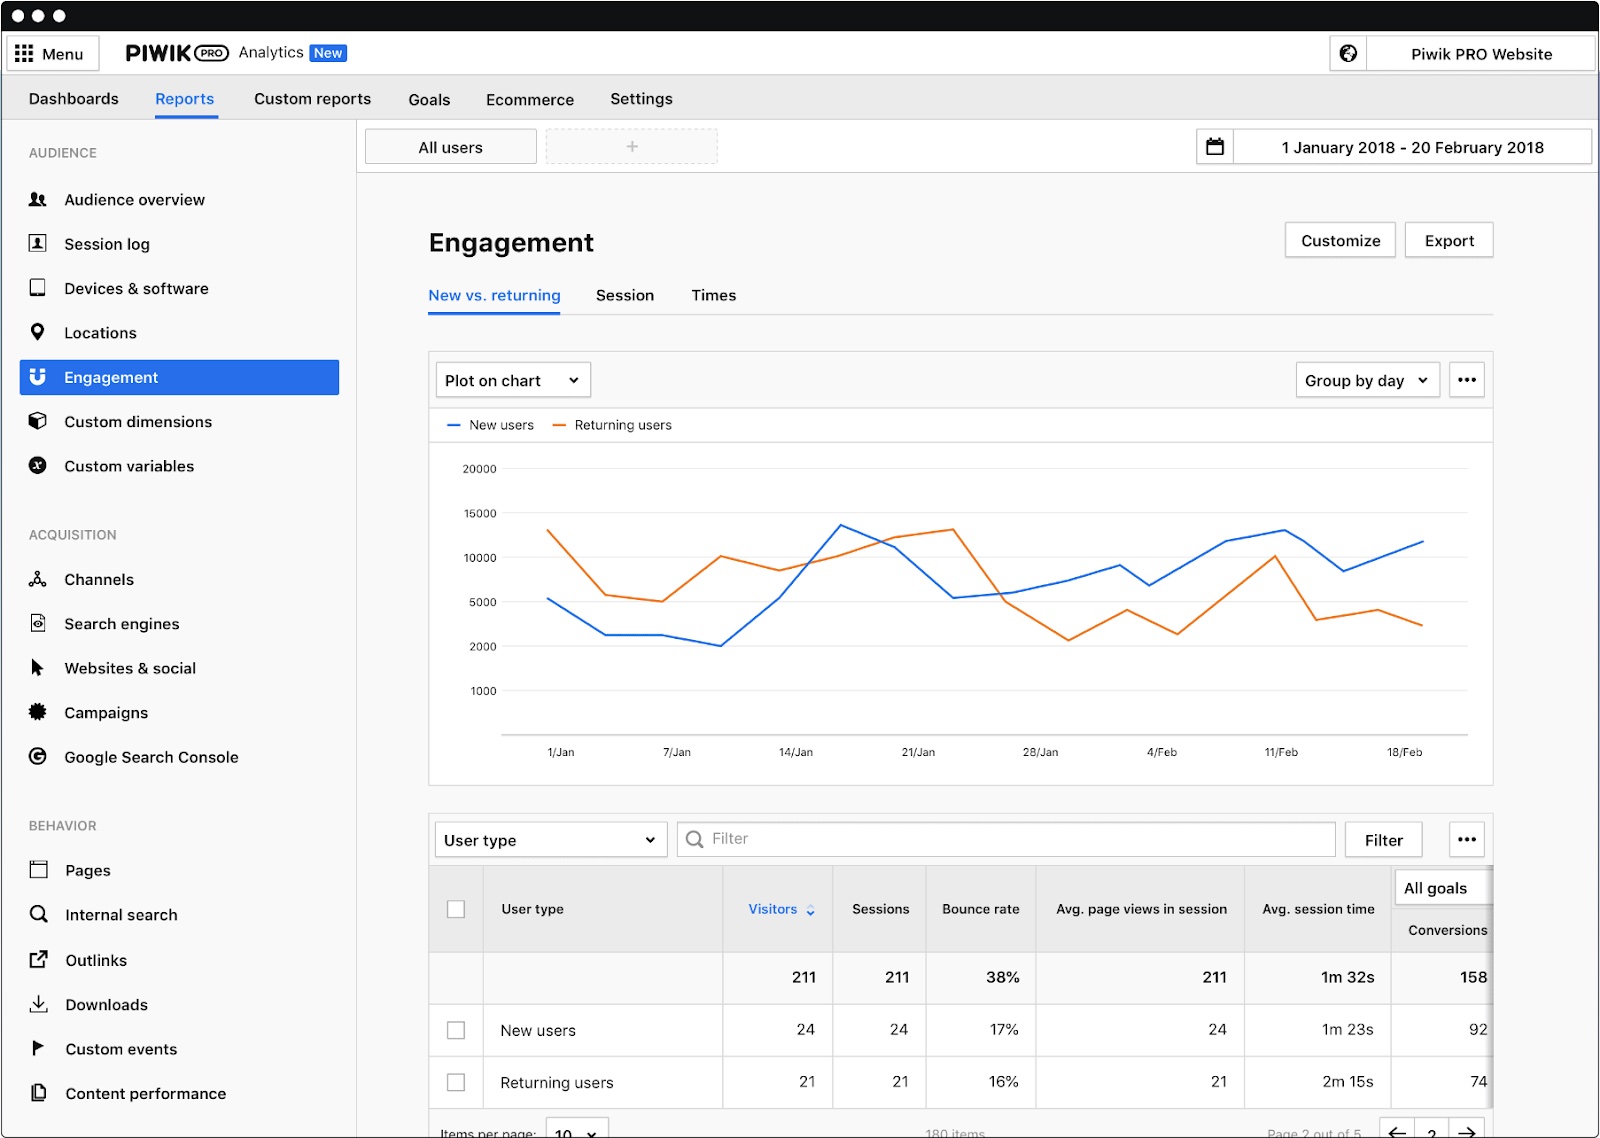 An engagement dashboard in Piwik PRO